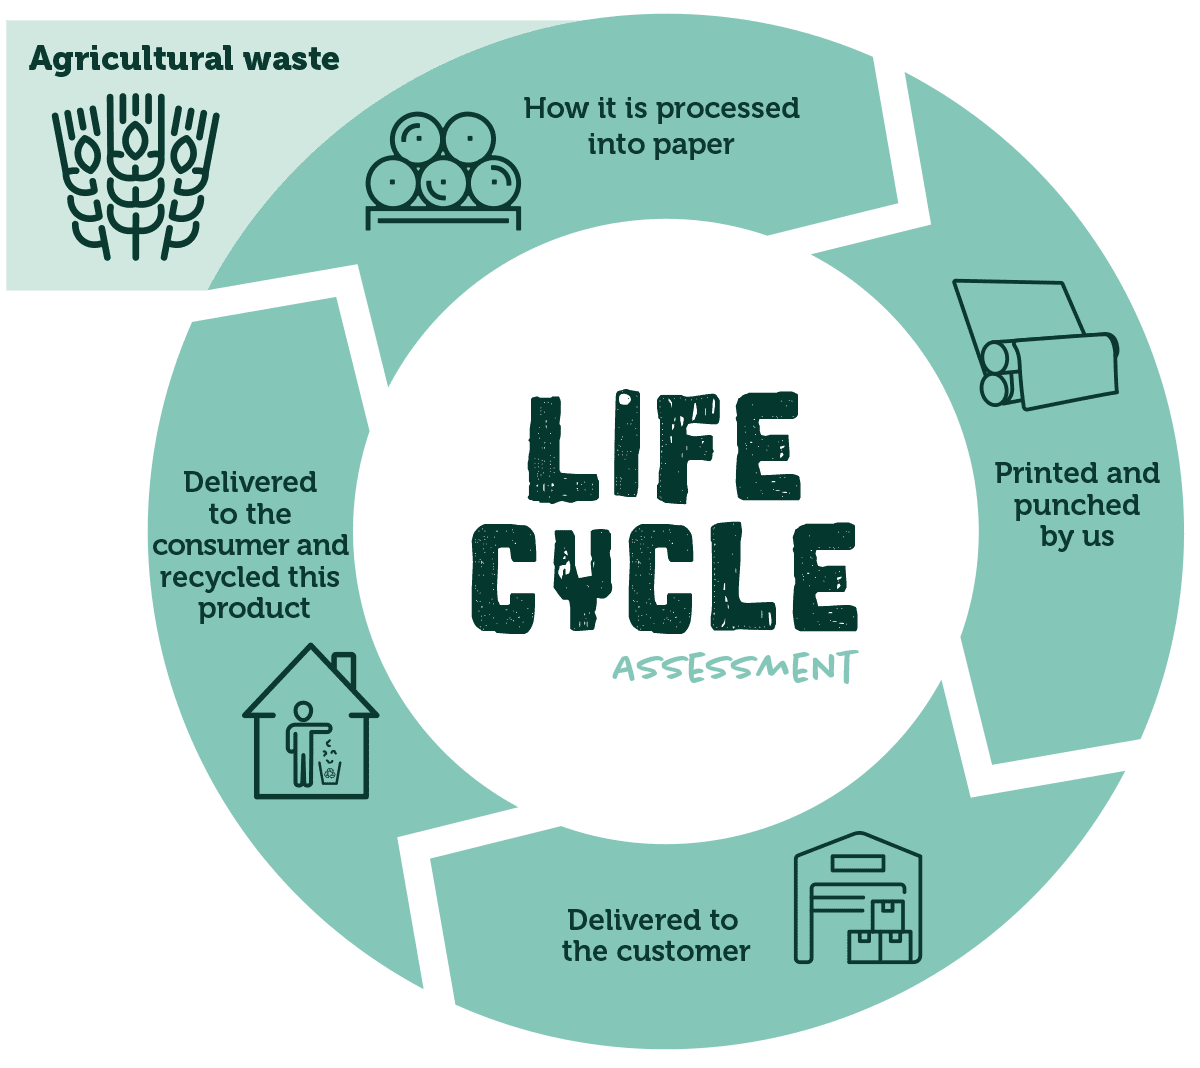 lifecycle-agricard